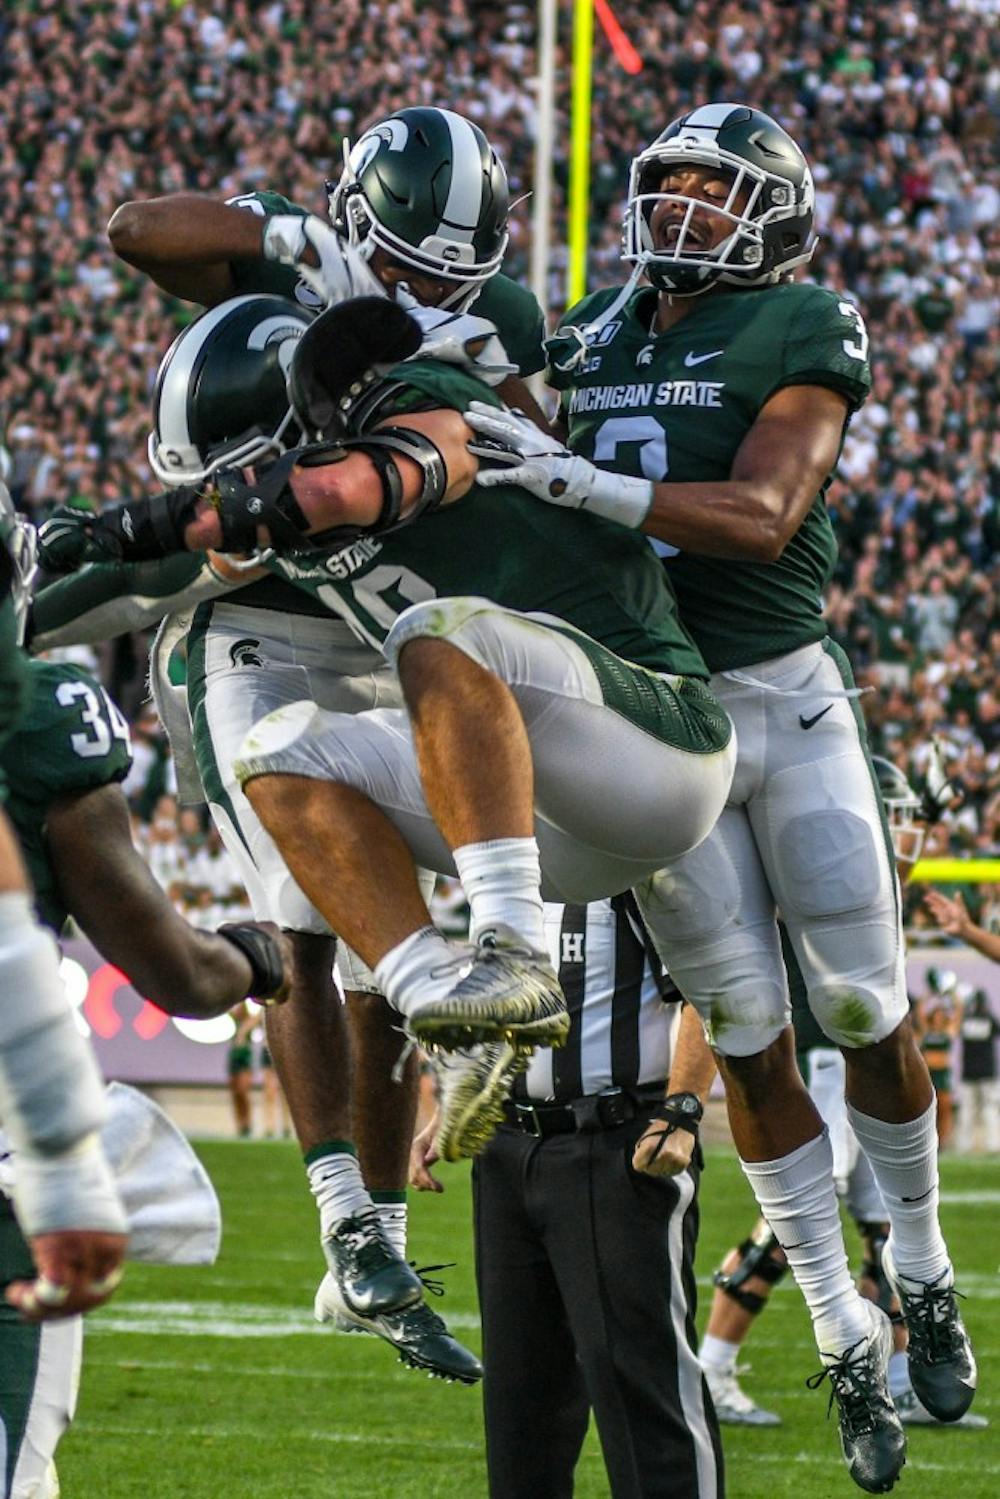 The Spartans celebrate during the game against Tulsa on Aug. 30, 2019 at Spartan Stadium. The Spartans defeated the Golden Hurricane, 28-7.